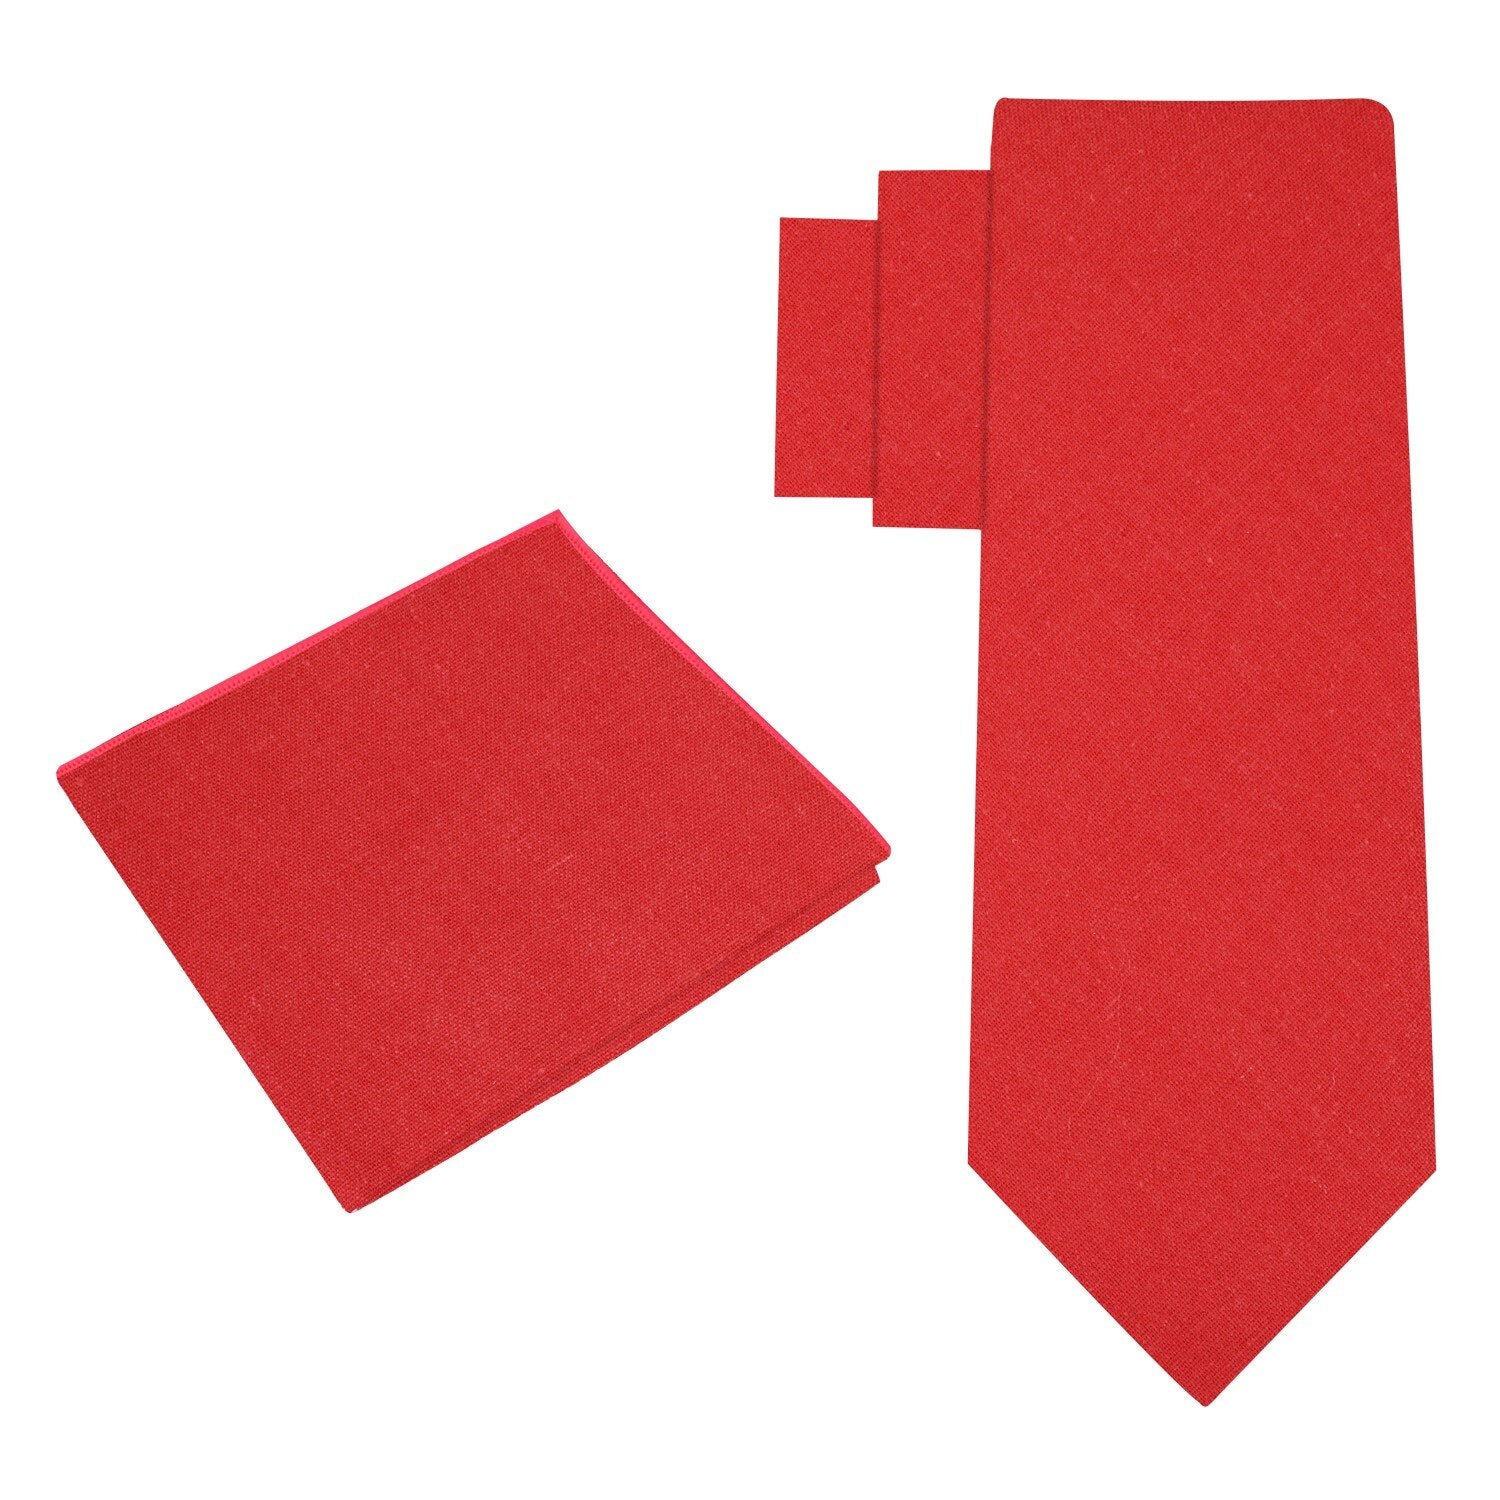 Alt View: Bright Red Linen Tie and Pocket Square